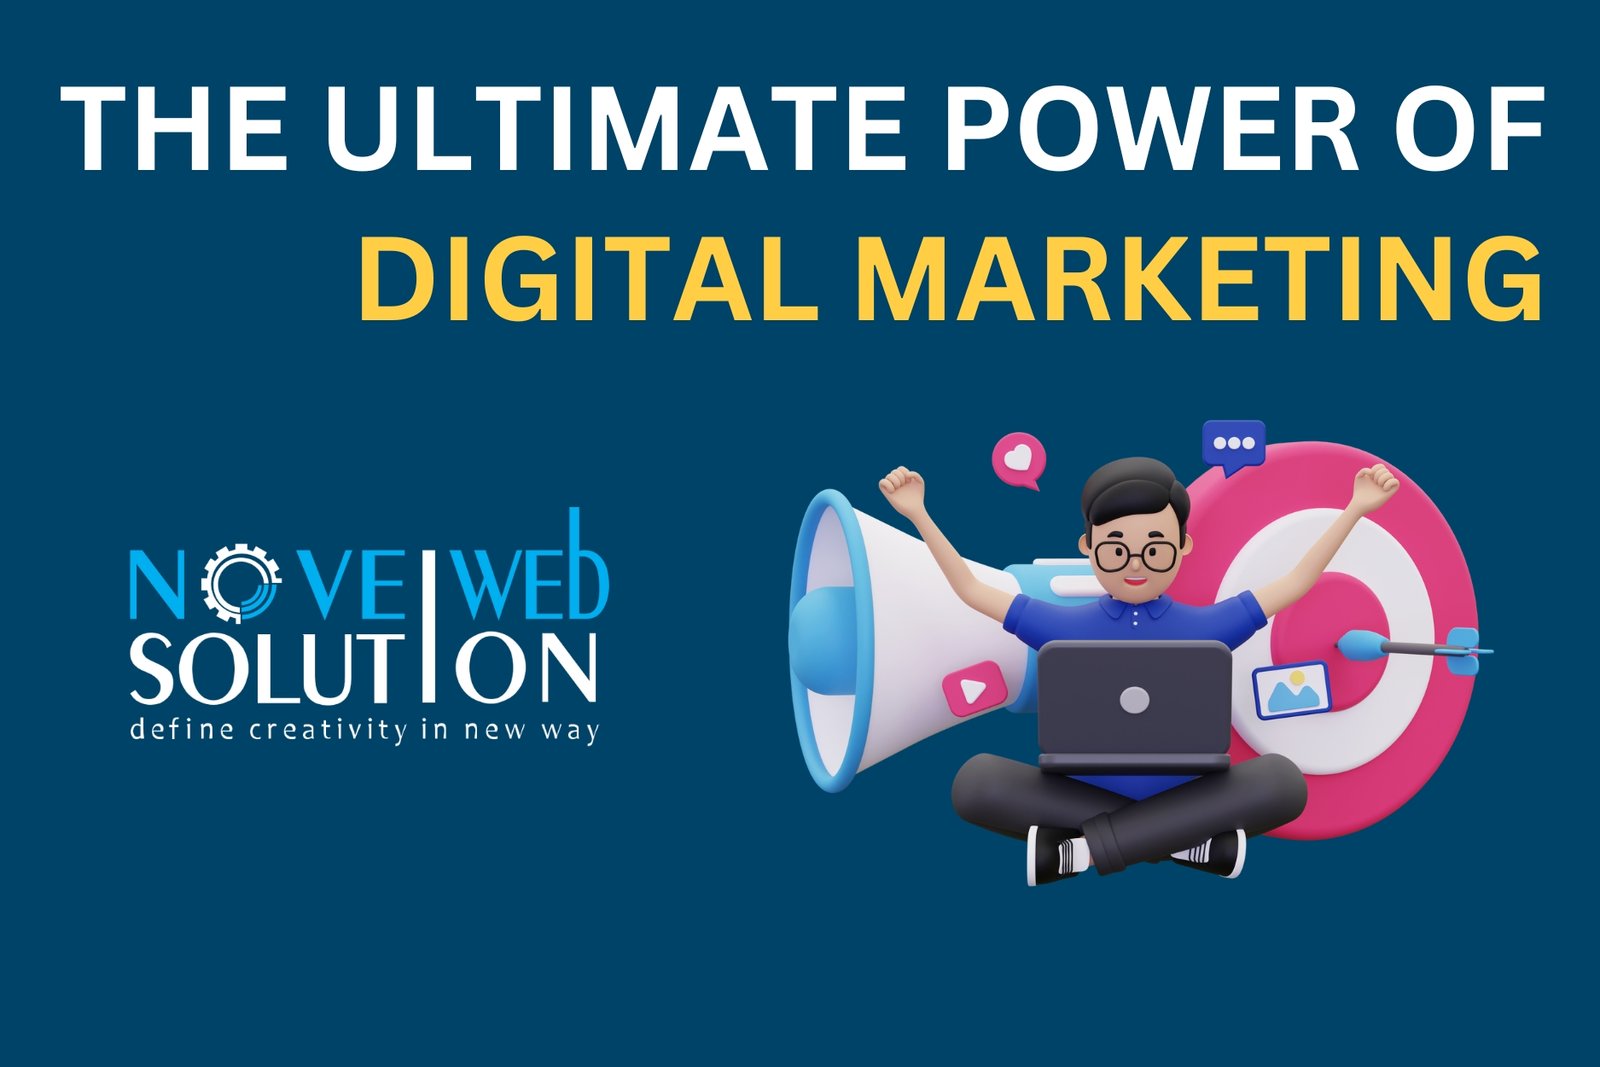 The Ultimate Power of Digital Marketing